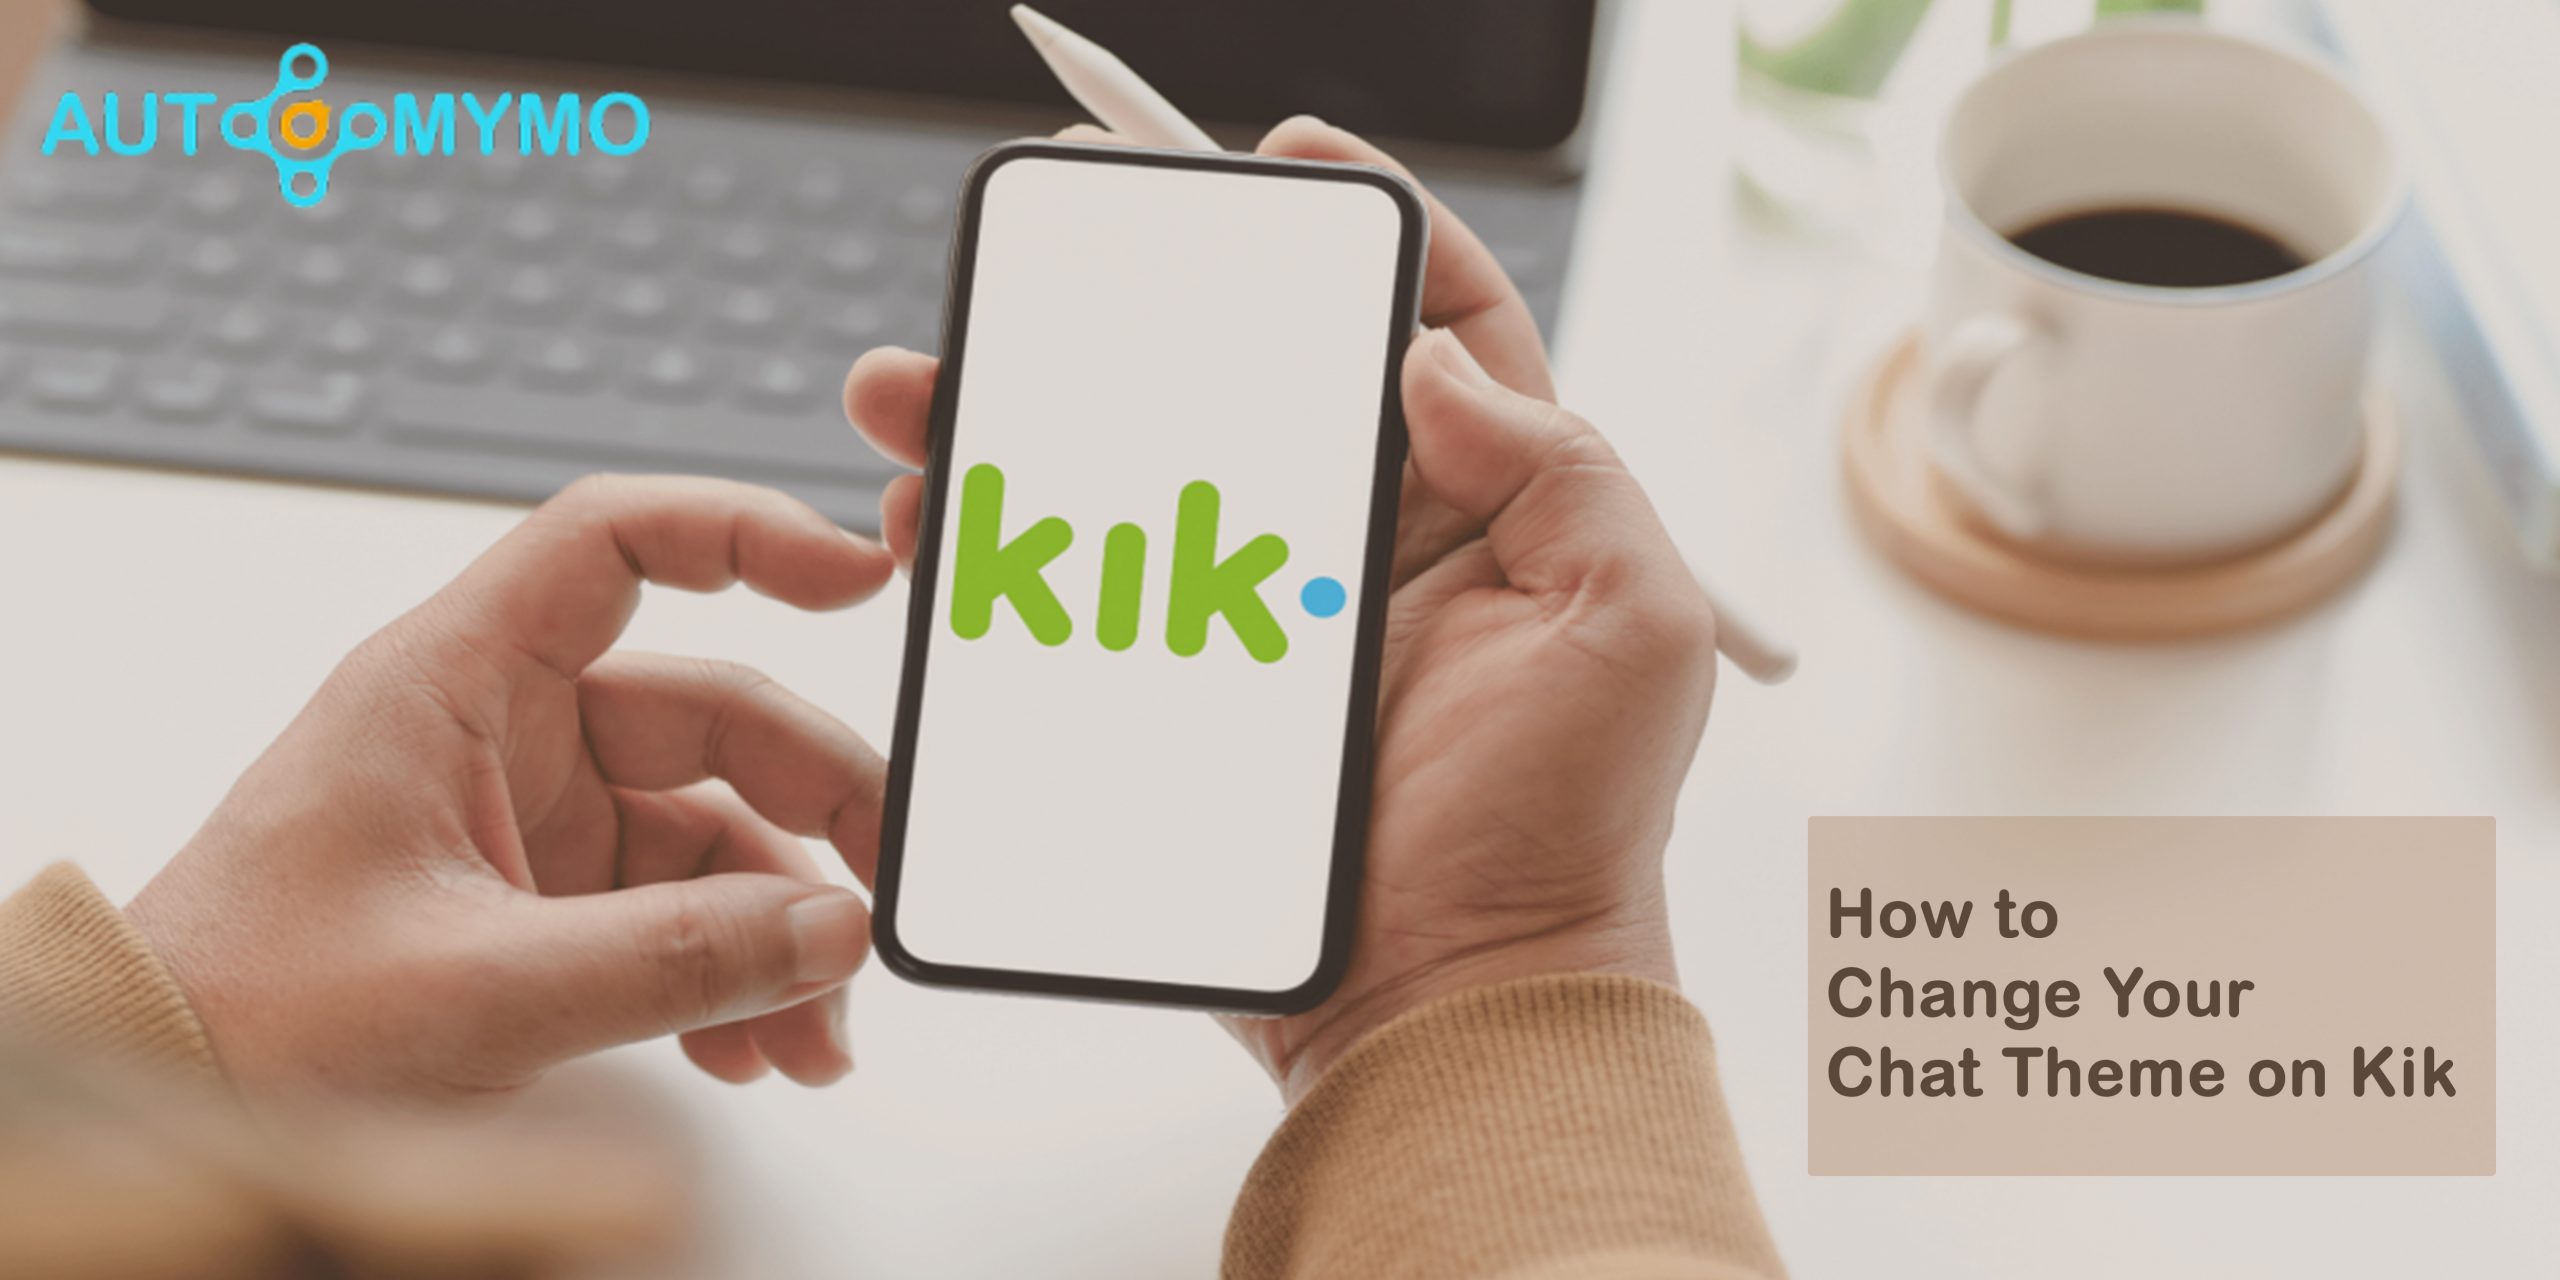 How to Change Your Chat Theme on Kik